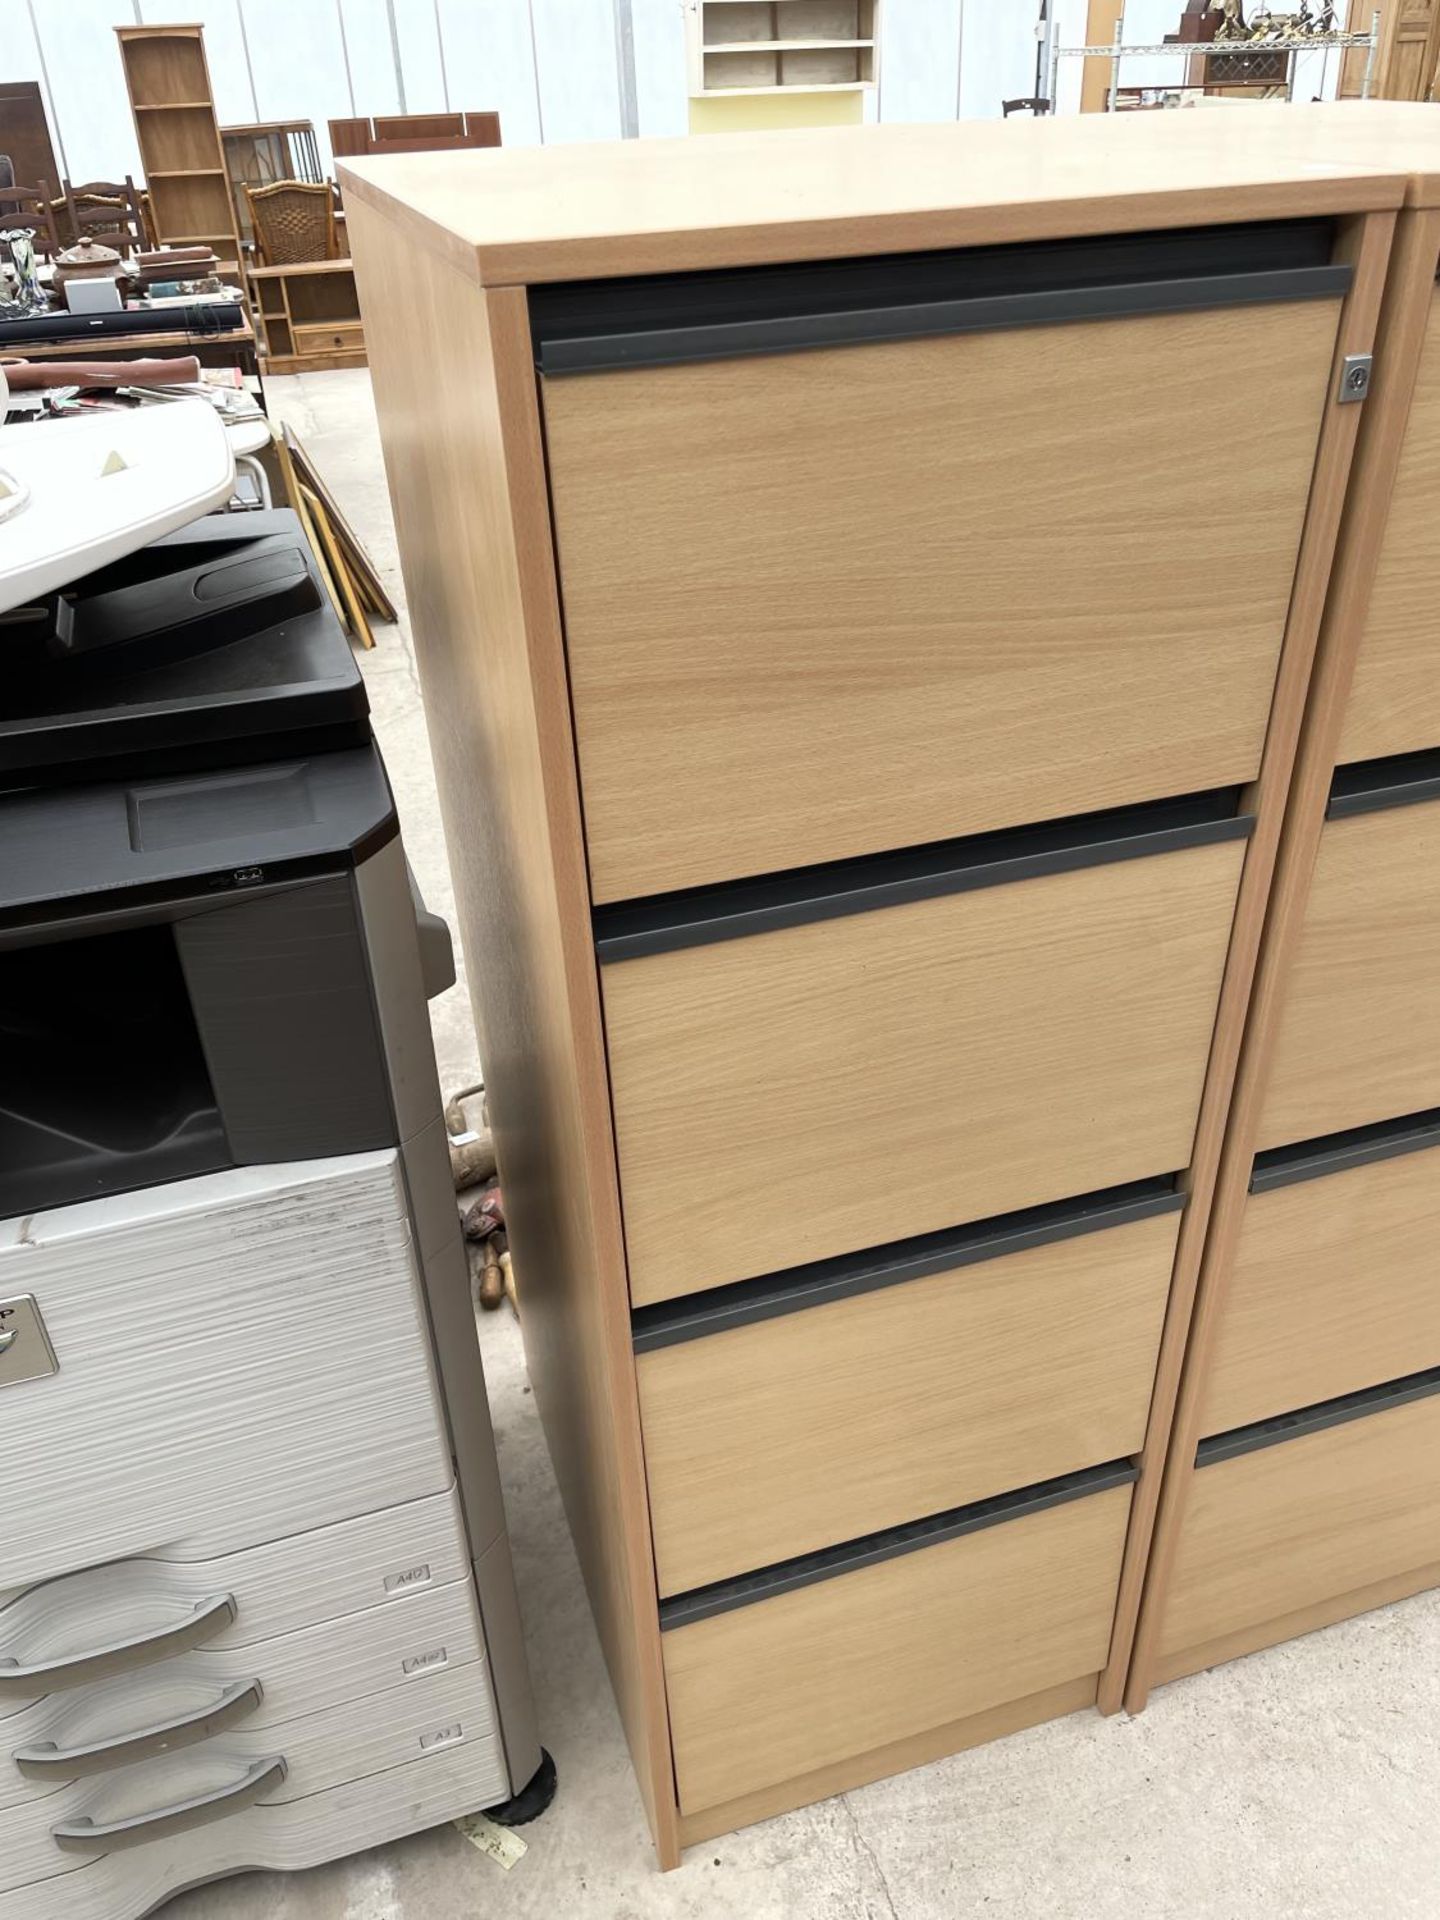 A PAIR OF FOUR DRAWER WOODEN FILING CABINETS - Image 2 of 3